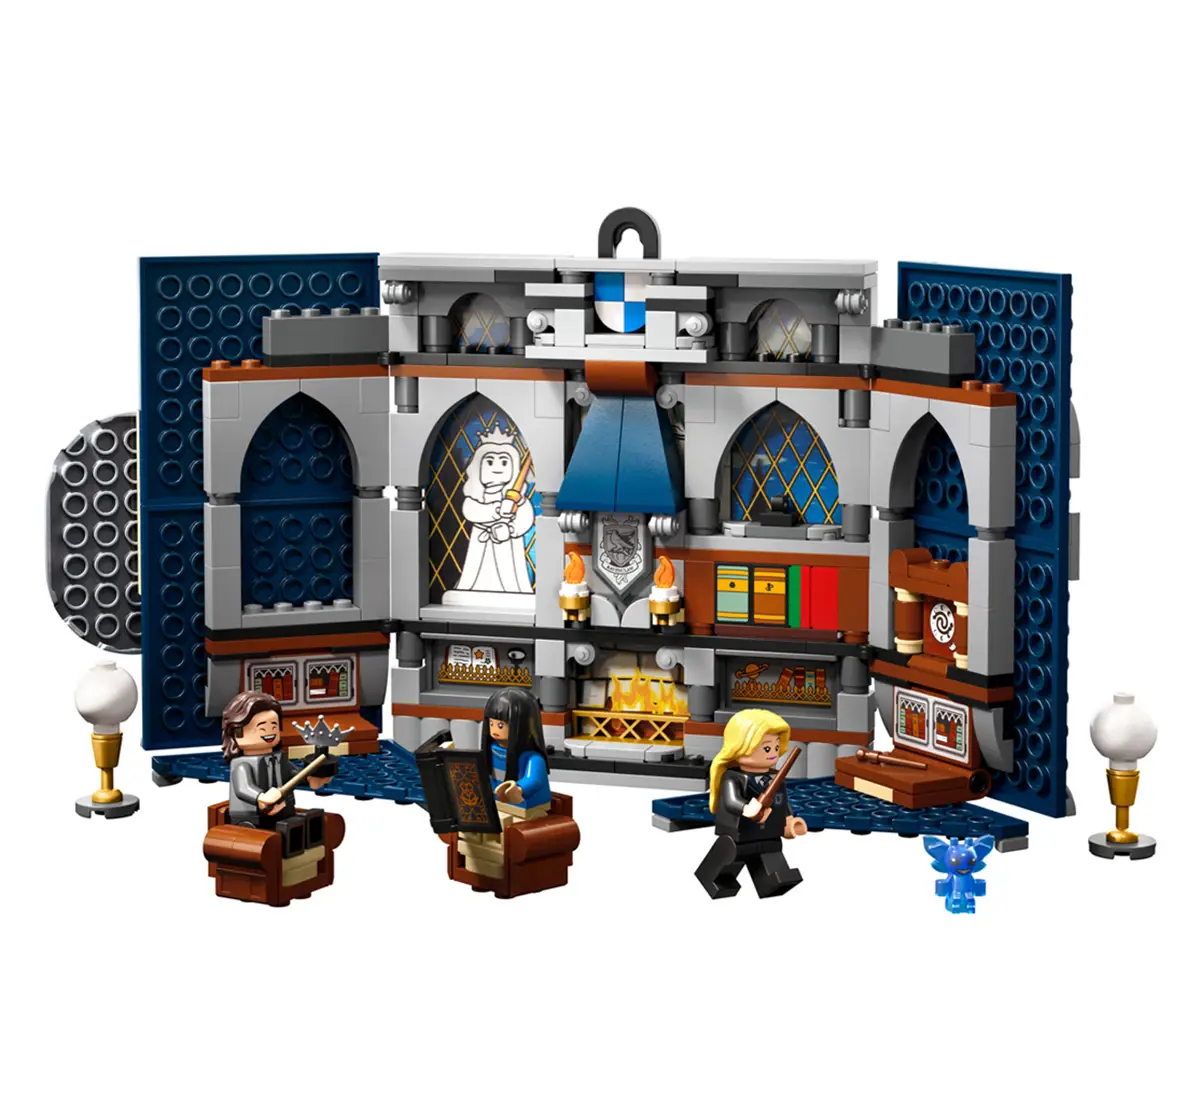 LEGO Harry Potter Ravenclaw House Banner 76411 Building Toy Set, 9Y+, 305 Pieces